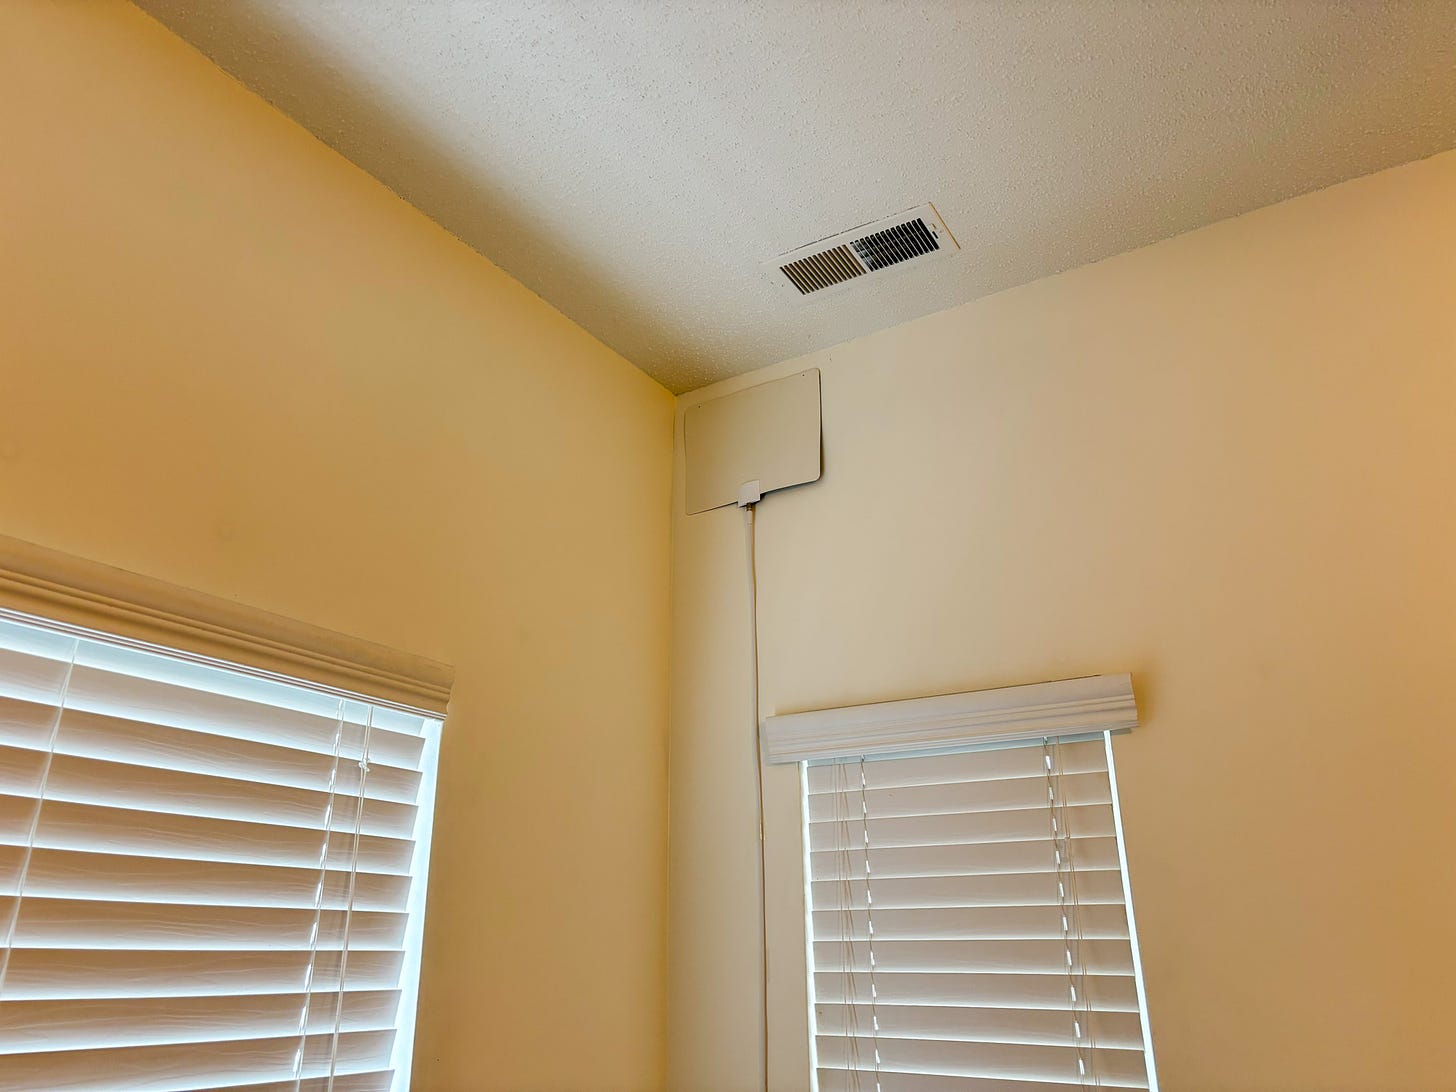 Flat antenna attached to the top of a corner wall